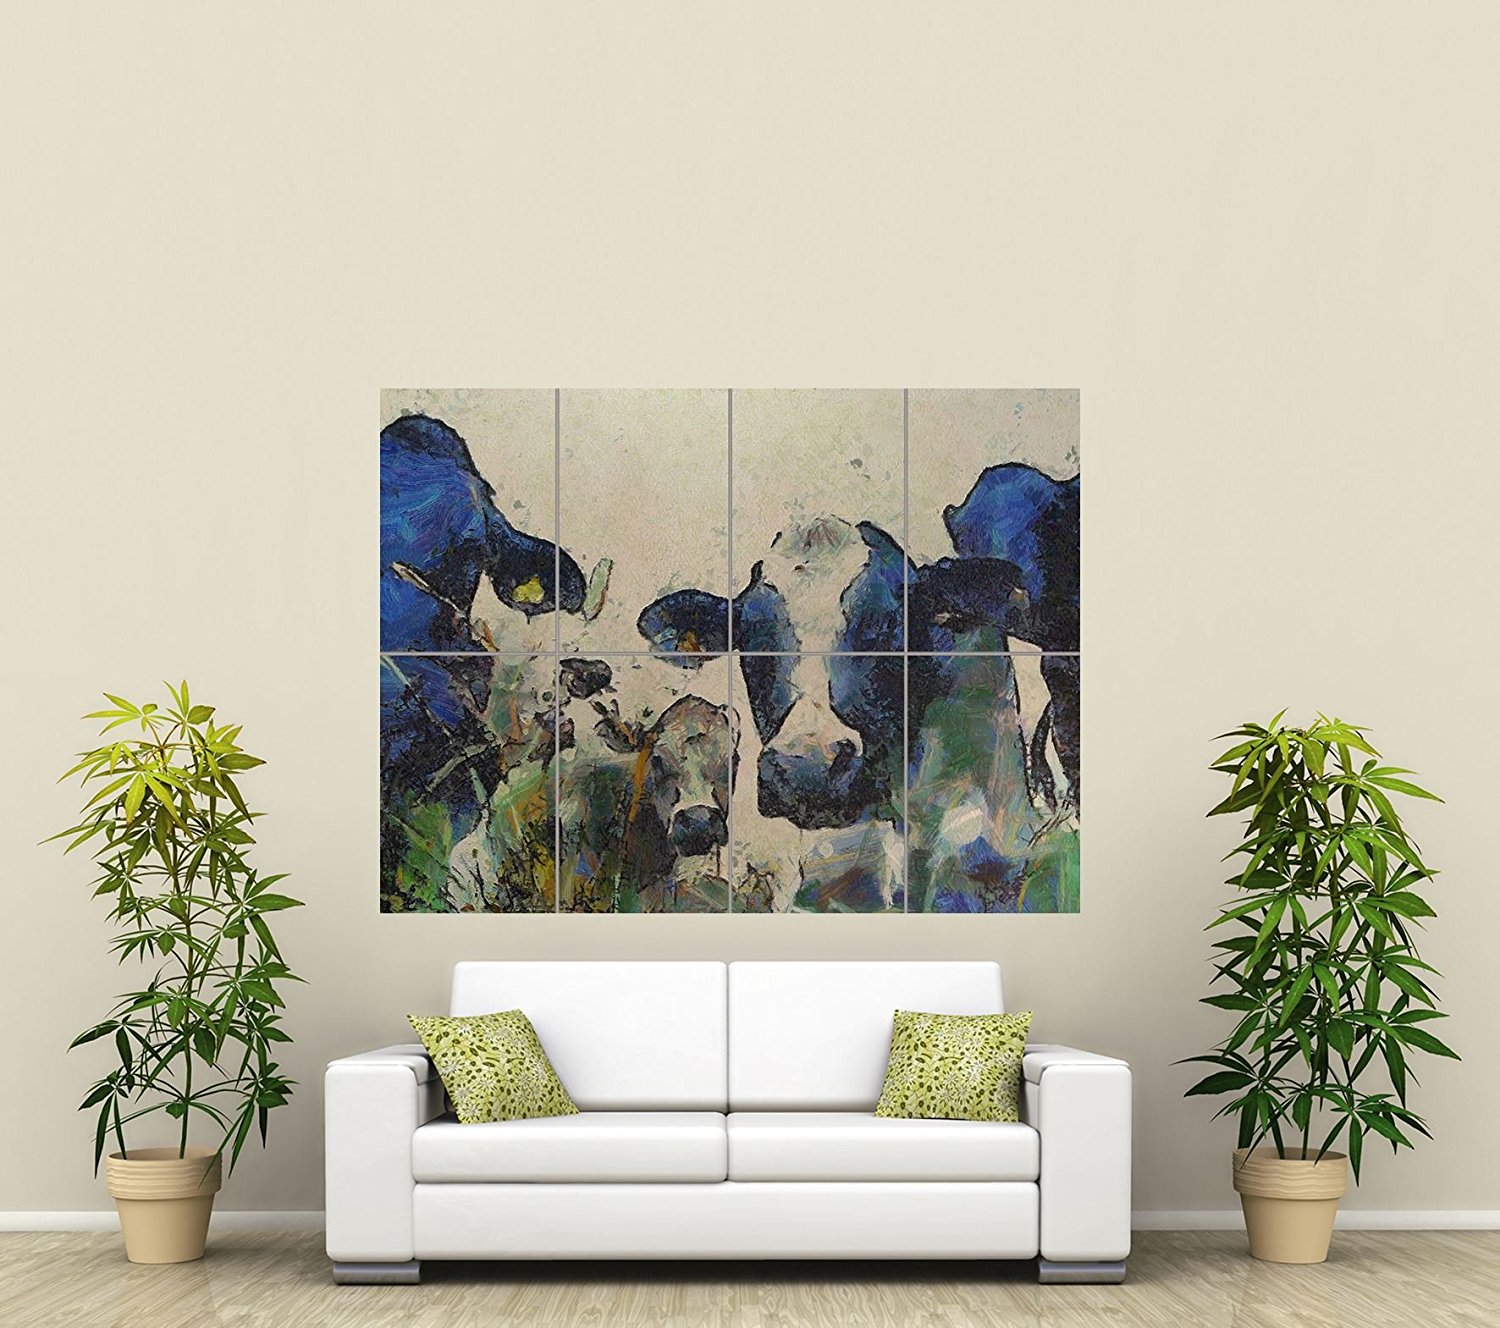 mosaic cow painting on beige wall with white couch, plants and green pillows